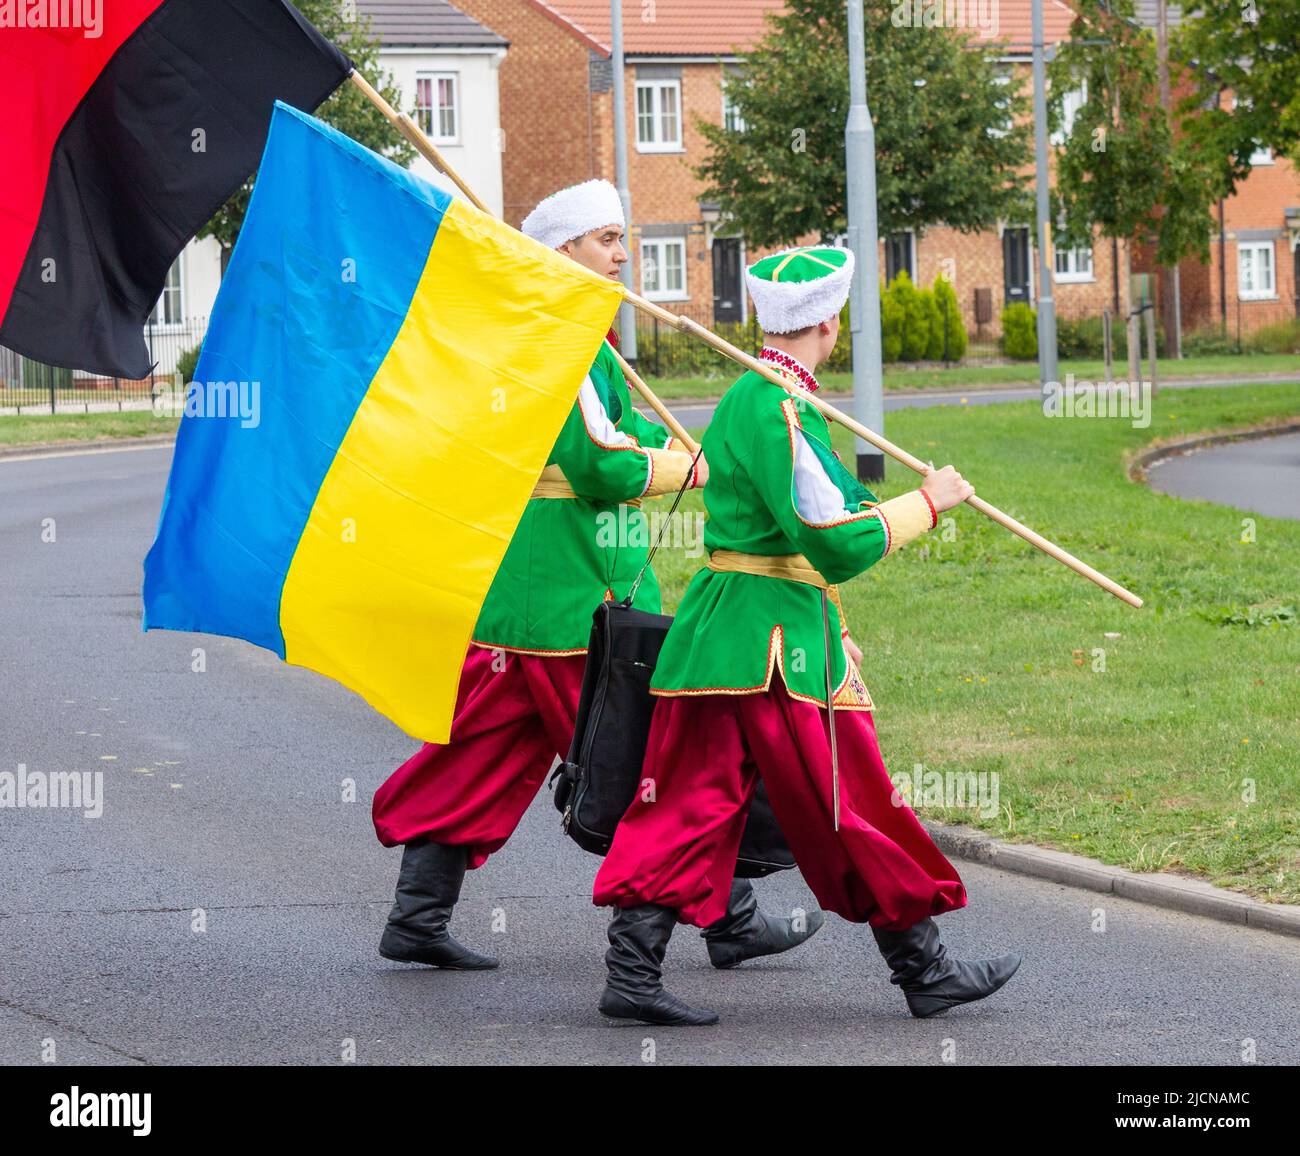 Men from Ukranian dance group in traditional dress. One carrying flag of Ukraine and one with flag of Ukranian Insurgent Army ( black and red ). Stock Photo